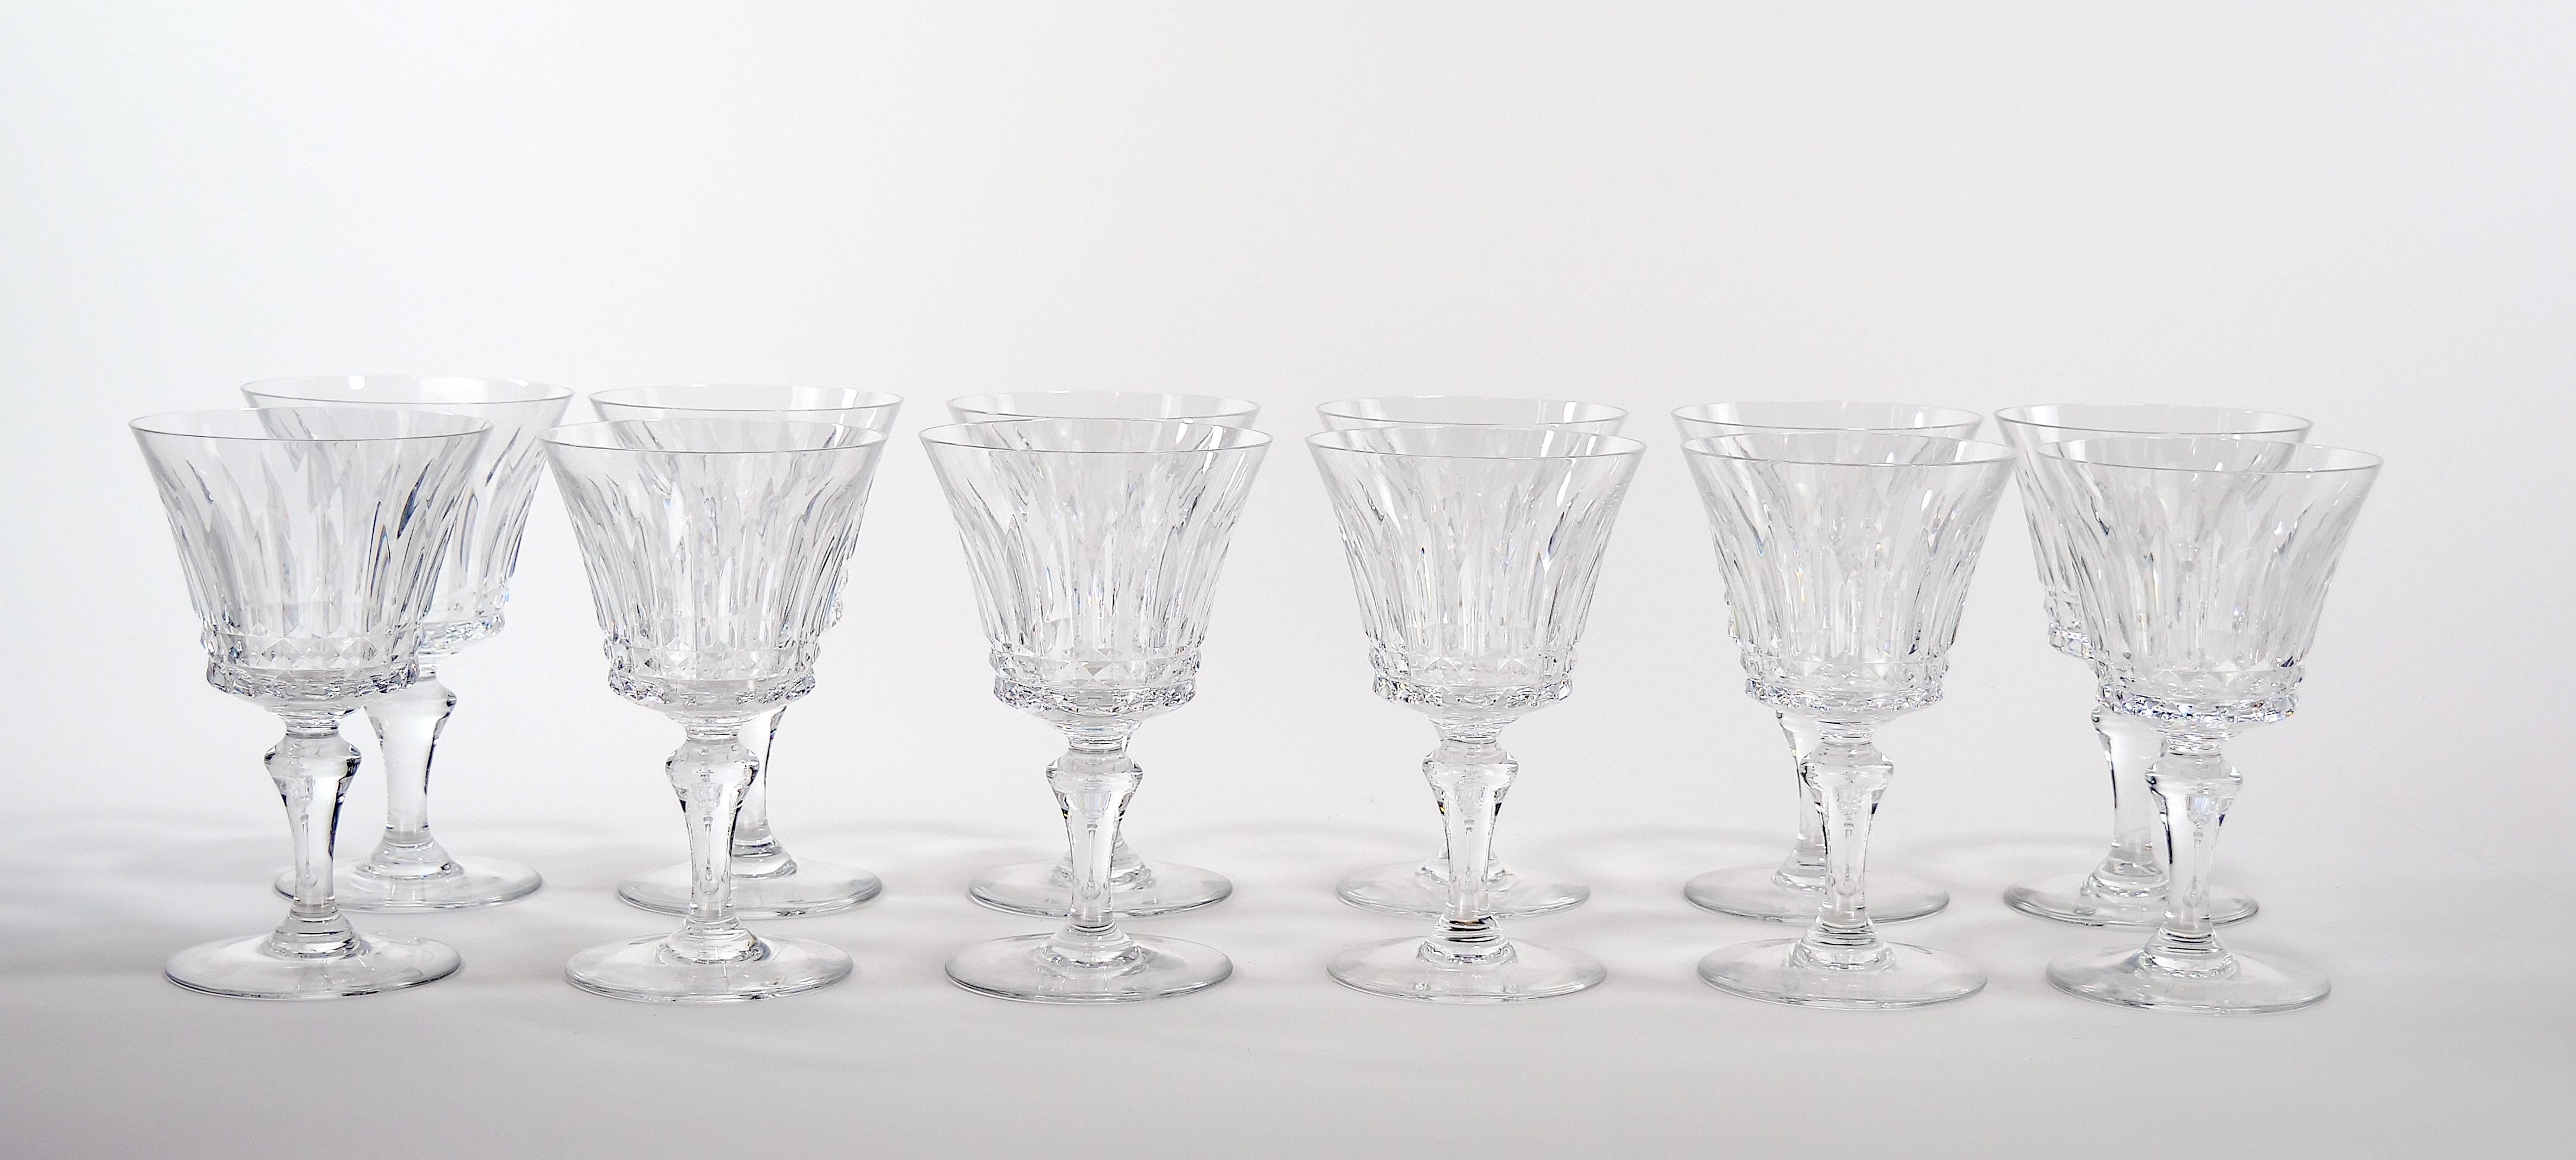 Richly and beautifully design inspired by a jeweled tiara, with sparkling cuts surrounding the glass. The deep cuts allow the light to retract and shine to a brilliant finish from any angle. Every piece of Baccarat crystal is Mouth blown and